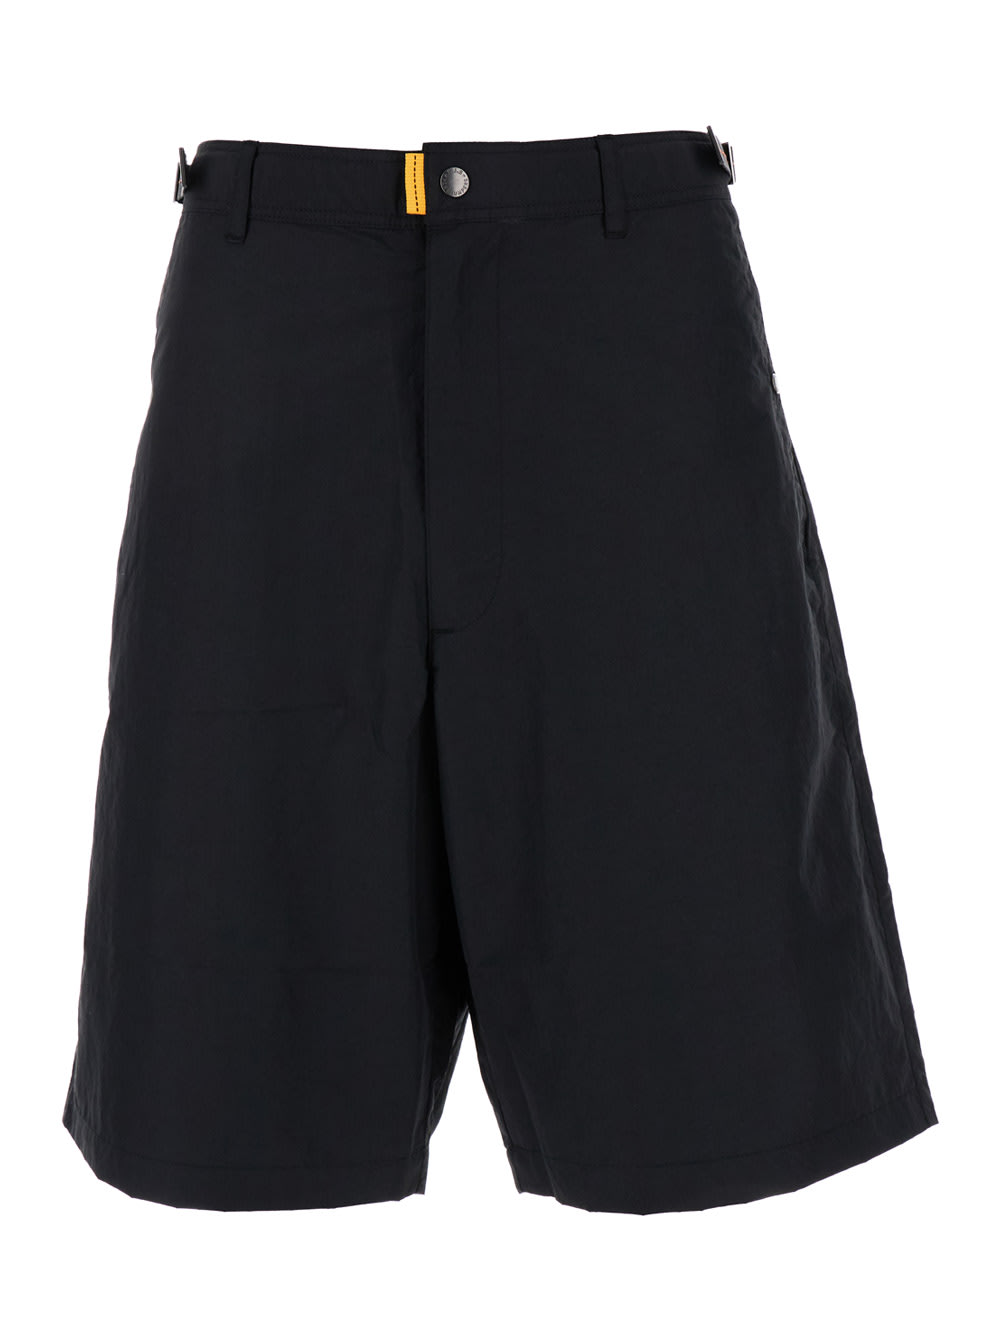 Black Bermuda Shorts With Buckles At Sides In Cotton Blend Man